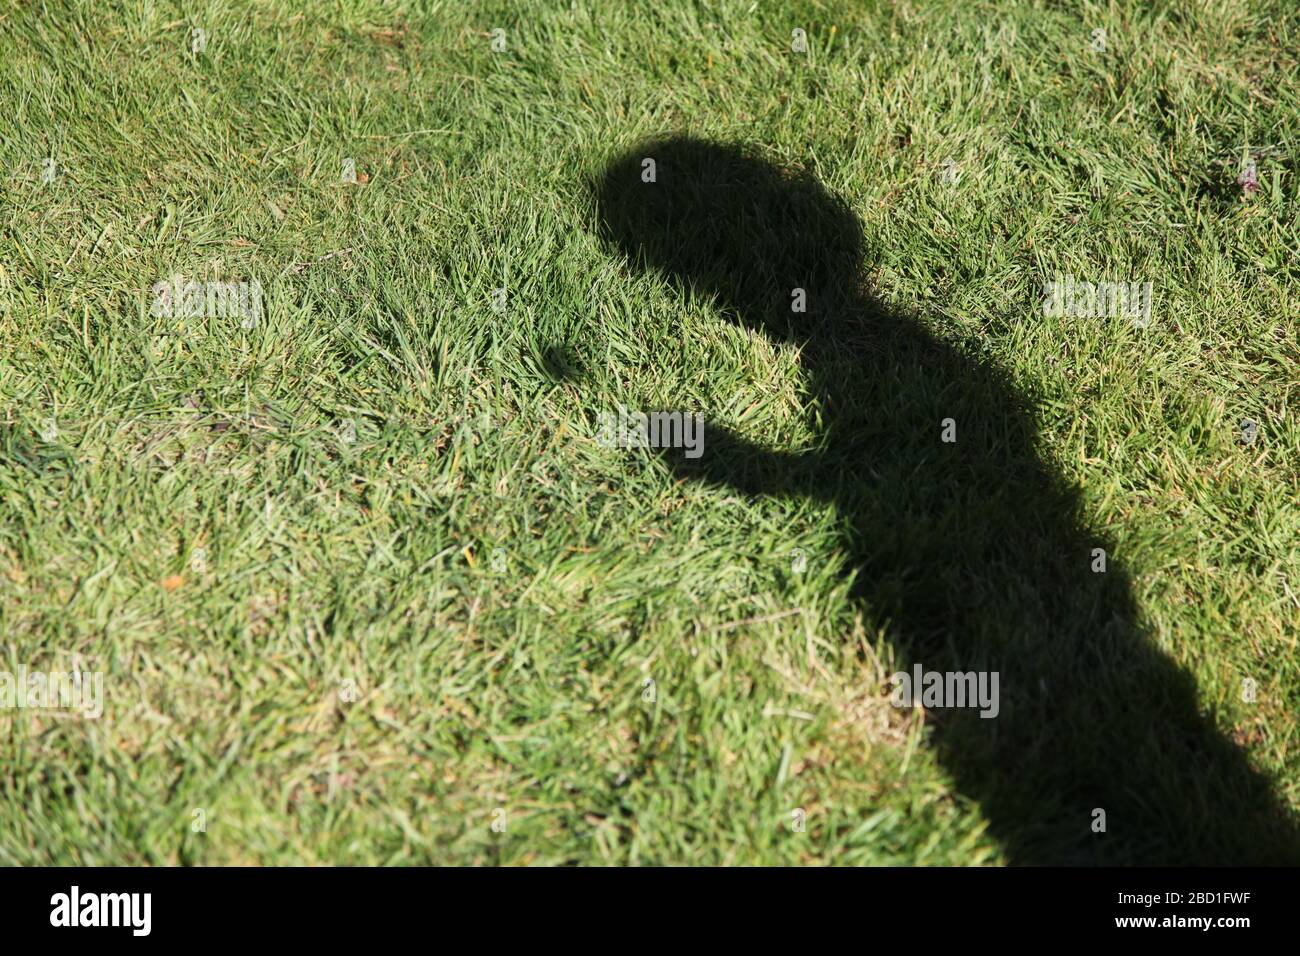 Silhouette shadow of a child boy against grass, blowing on a dandelion 'Taraxacum' parachute ball head in a UK garden at daytime, Spring 2020 Stock Photo